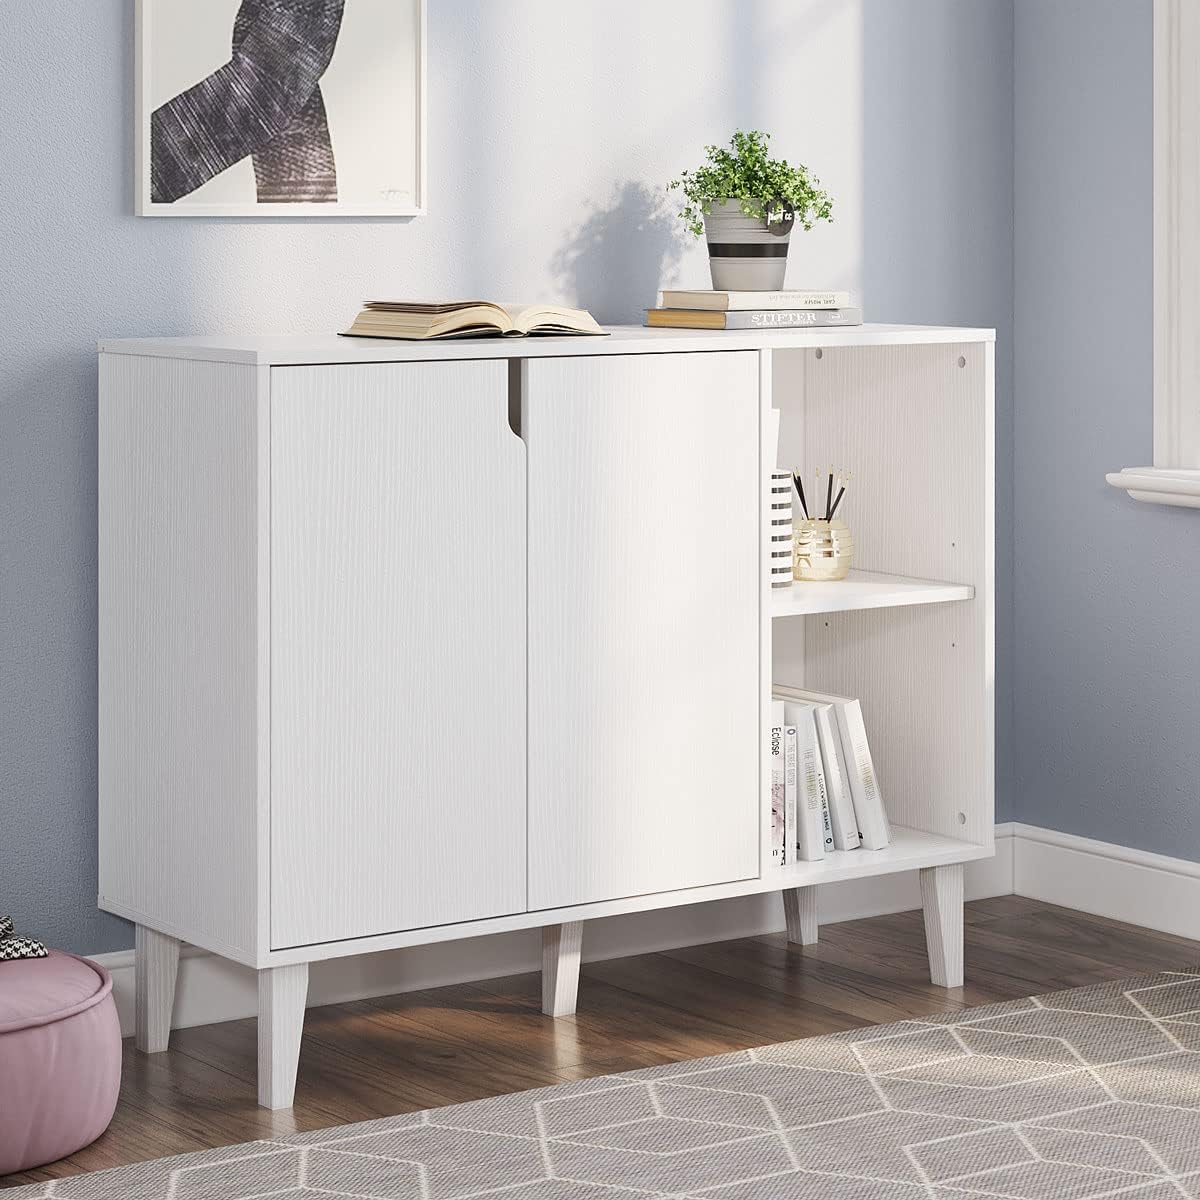 I needed something smaller for my attic bathroom and this is perfect. Fairly easy to assemble, sturdy and clean modern look. Plenty of storage and counter space. Highly recommend especially with value.